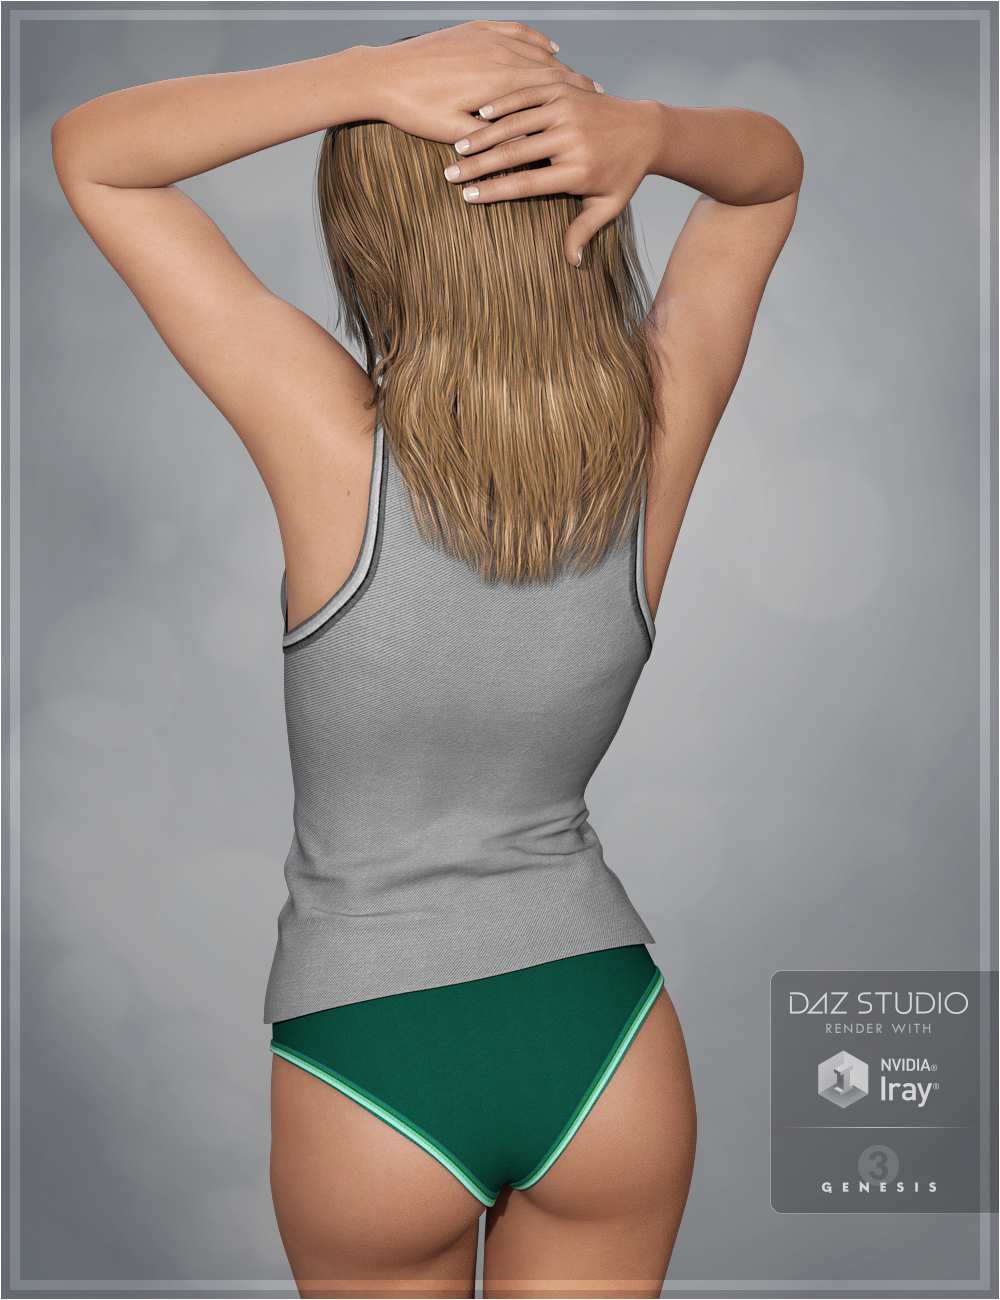 Lazy Nights for Genesis 3 Female(s) by: OziChick, 3D Models by Daz 3D